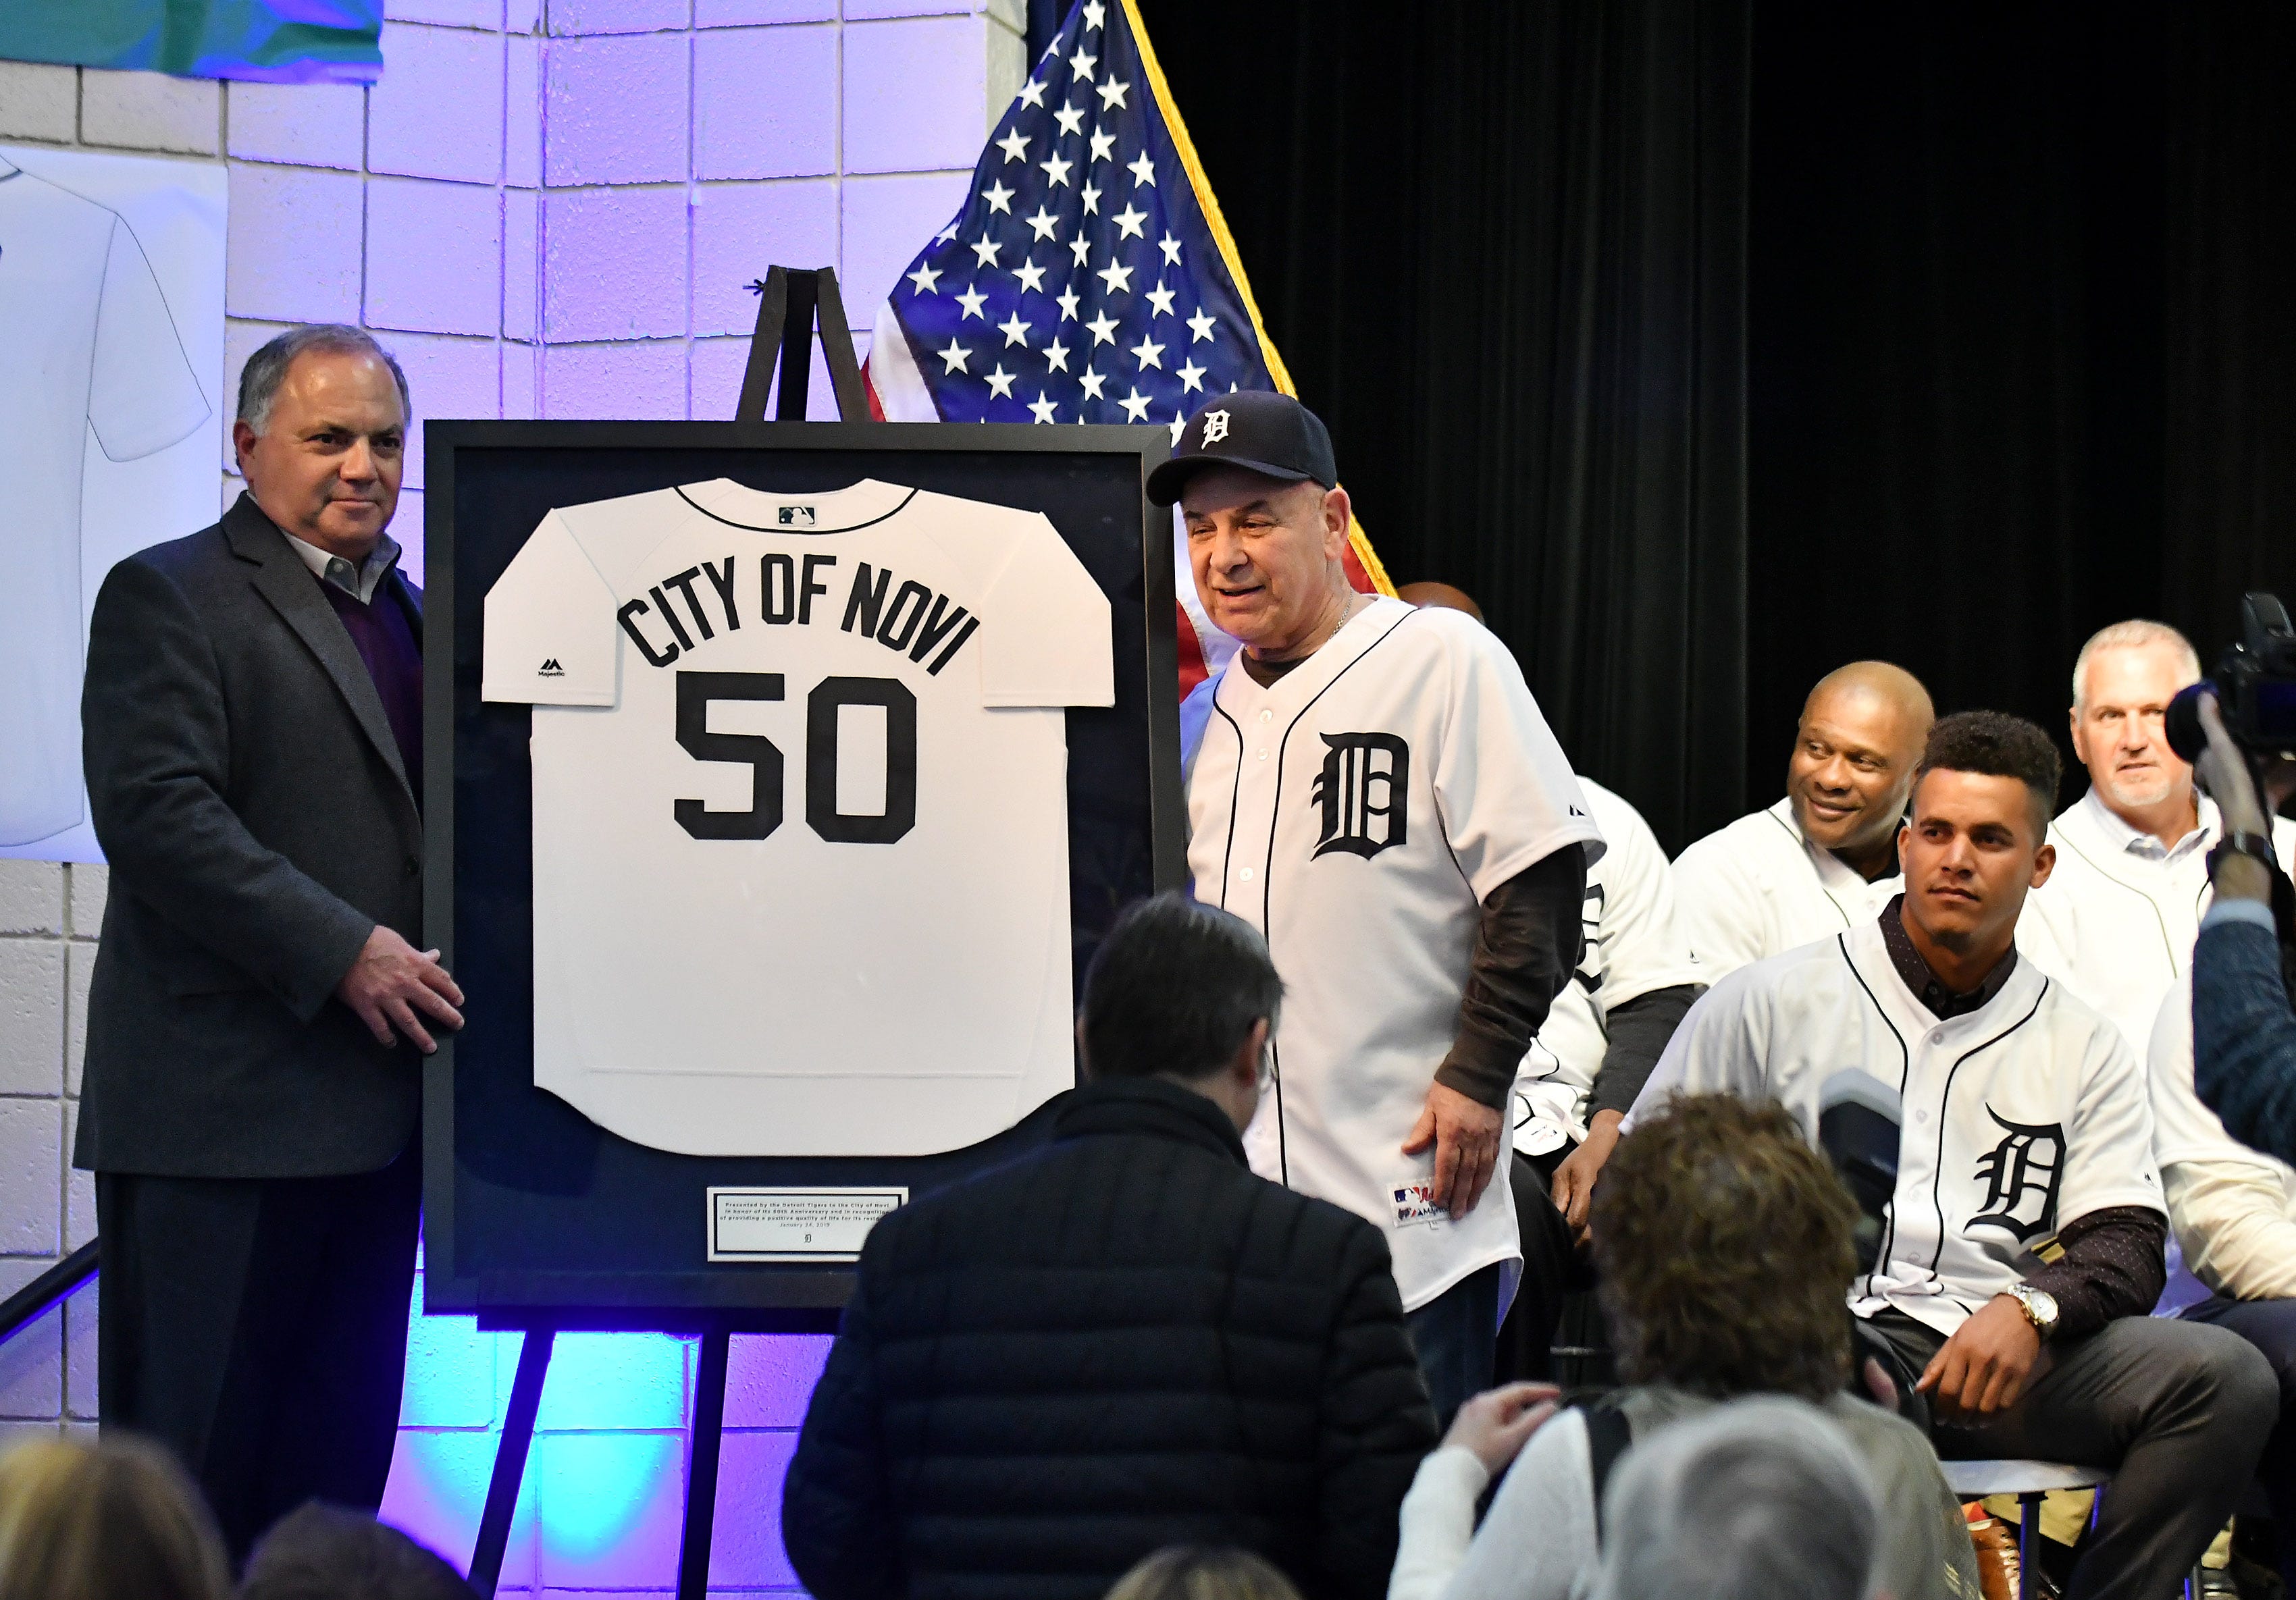 Tigers executive vice president of baseball operations and general manager Al Avila, left, and Novi mayor Bob Gatt with a jersey gift from the Tigers at the Novi Civic Center.